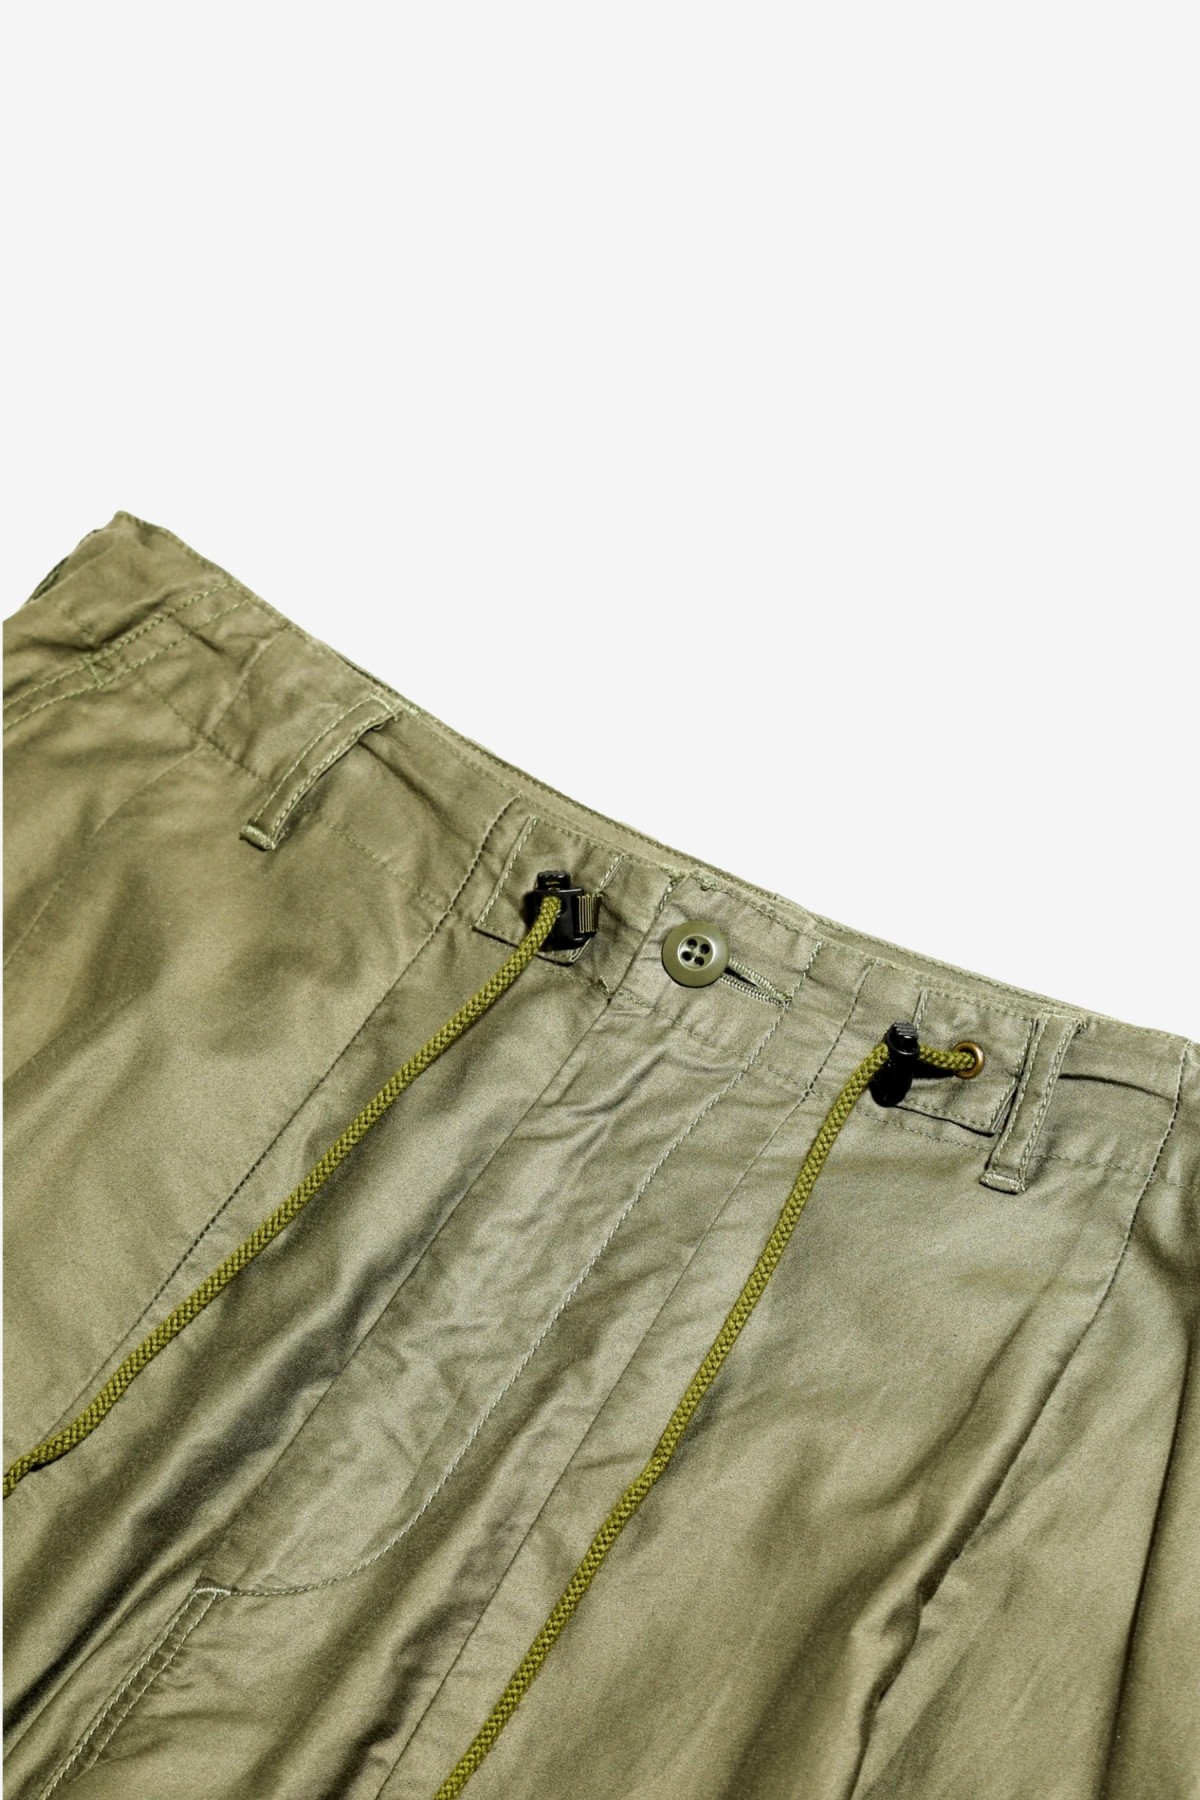 Needles H.D. Pant in Olive